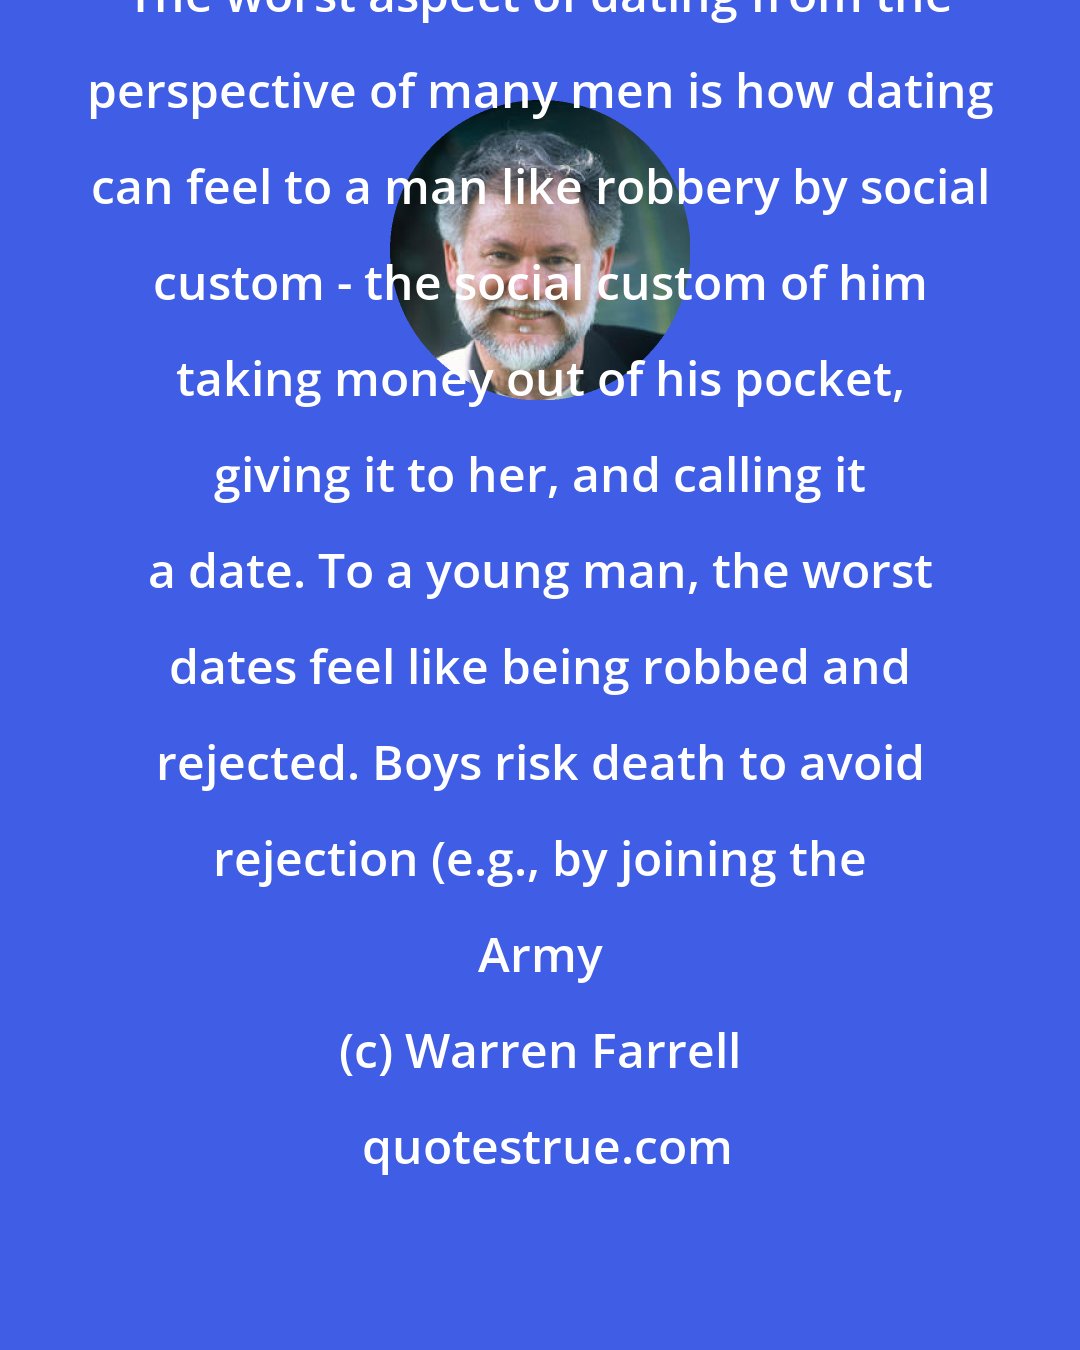 Warren Farrell: The worst aspect of dating from the perspective of many men is how dating can feel to a man like robbery by social custom - the social custom of him taking money out of his pocket, giving it to her, and calling it a date. To a young man, the worst dates feel like being robbed and rejected. Boys risk death to avoid rejection (e.g., by joining the Army